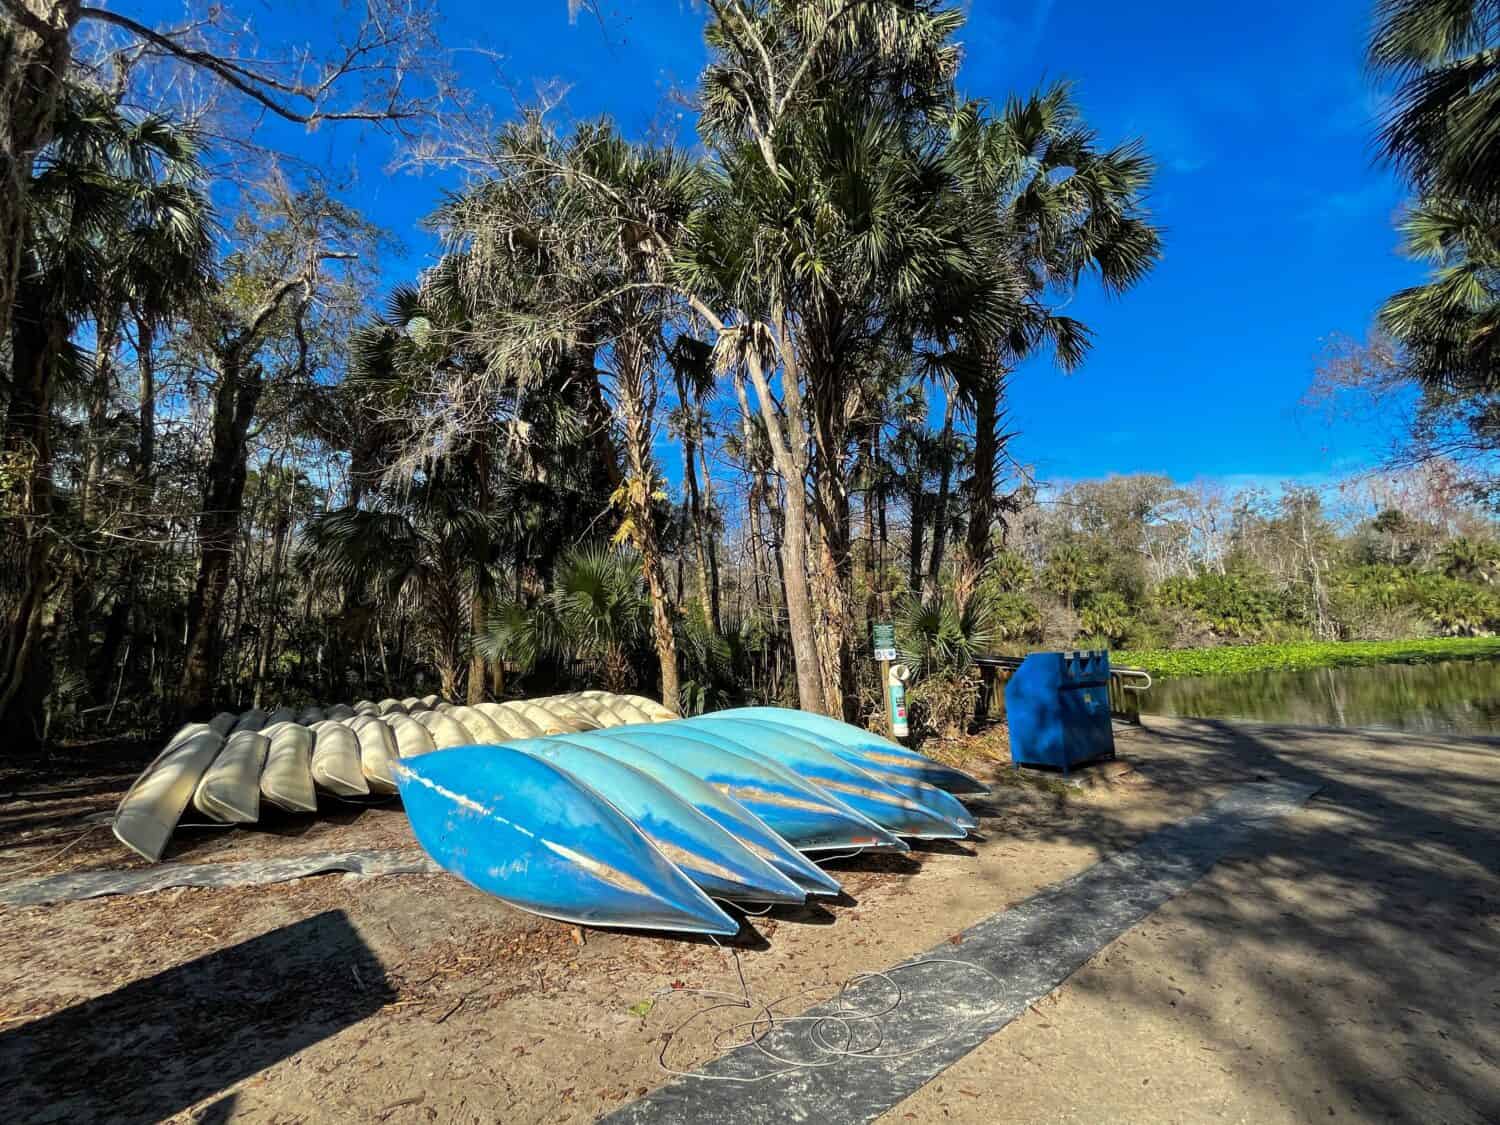 Canoes lined up for people to rent at a state park in Florida.